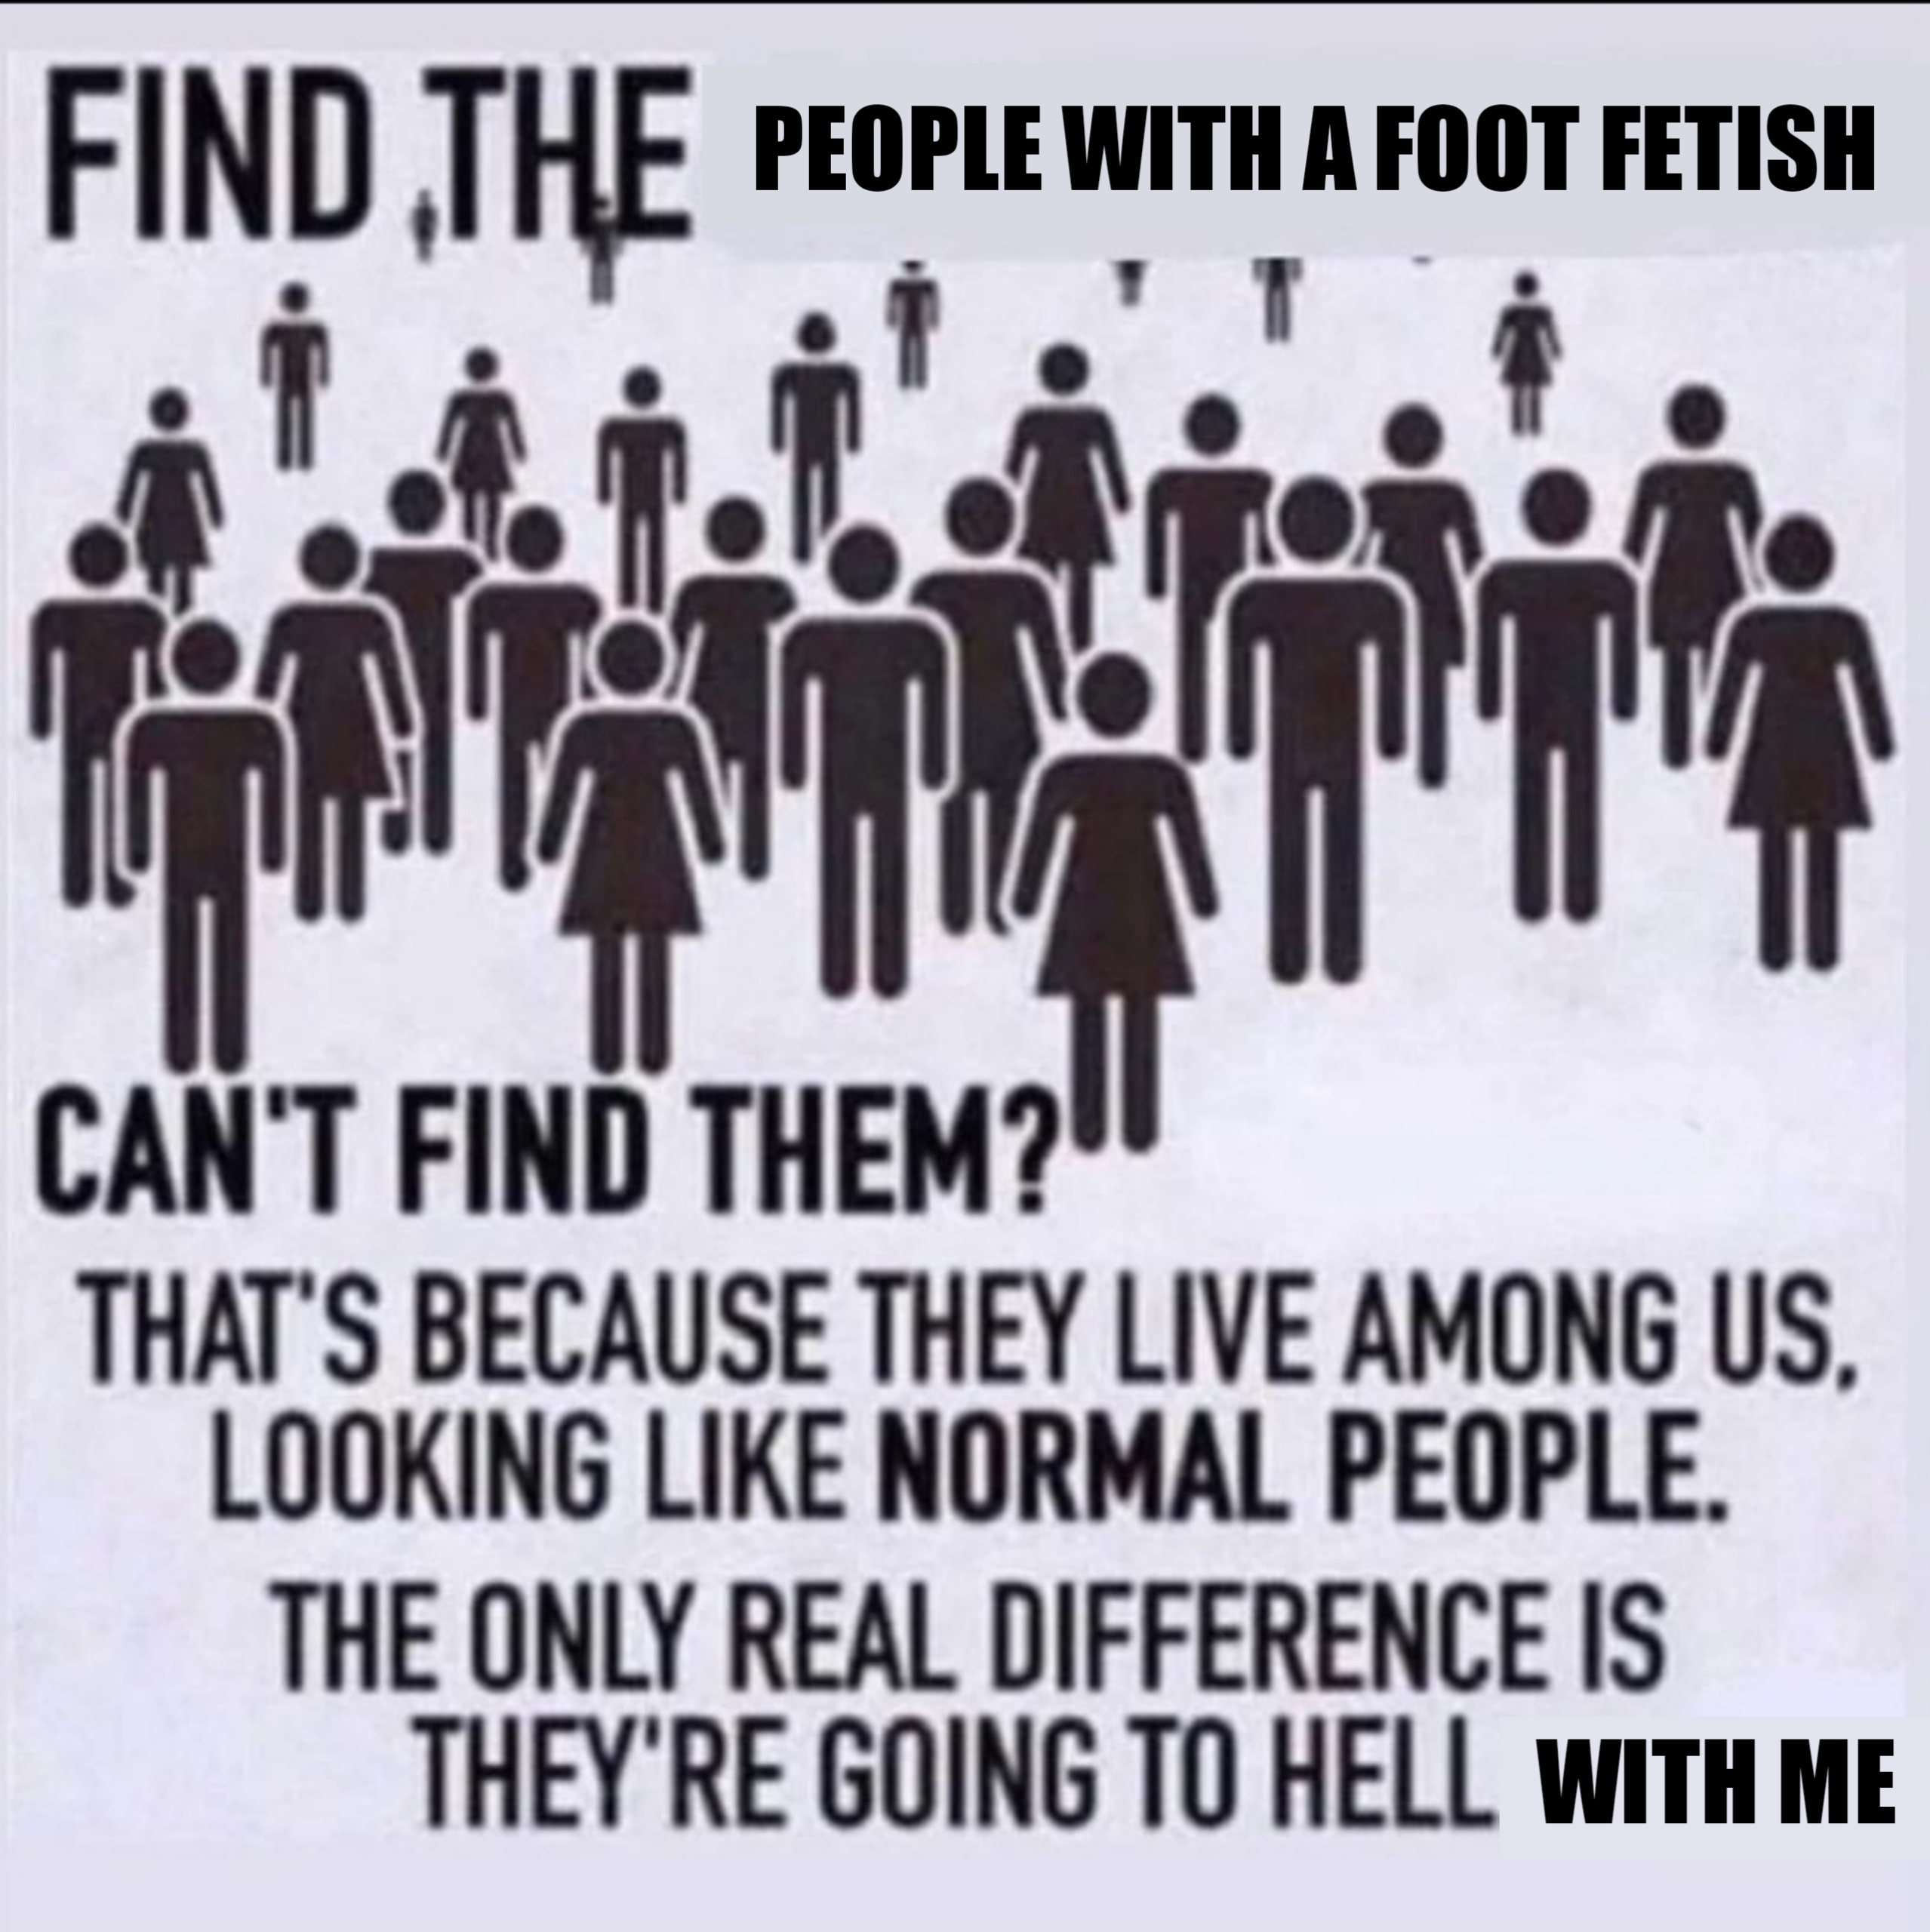 funny memes - dank memes - can t find them that's because they live among us - Find The People With A Foot Fetish Ta Can'T Find Them? That'S Because They Live Among Us. Looking Normal People. The Only Real Difference Is They'Re Going To Hell With Me